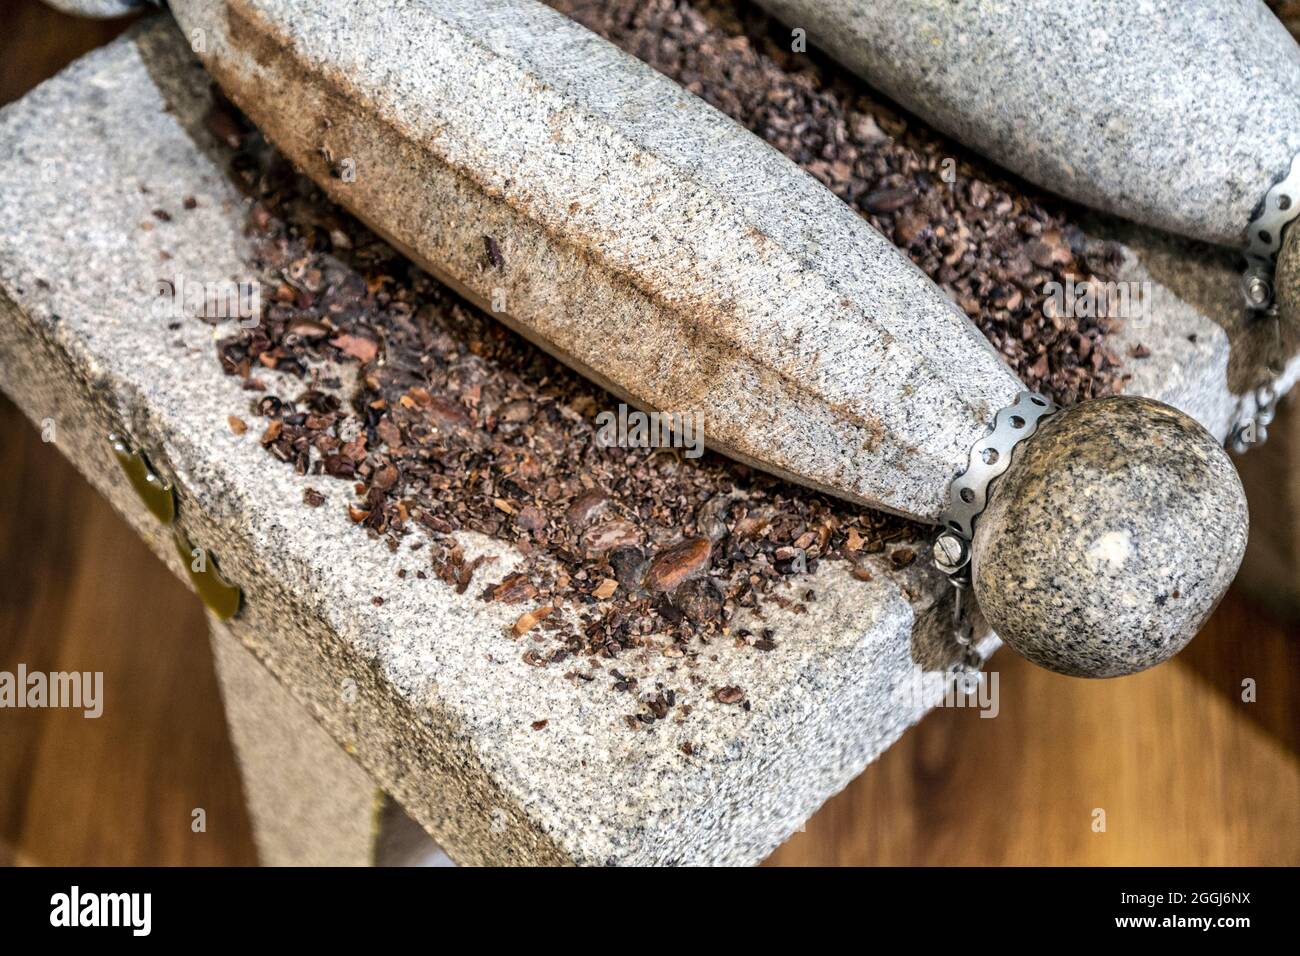 Metate - Mexican cocoa grinding stone used to turn cocoa beans into chocolate mass at Szamos Chocolate Museum in Budapest, Hungary Stock Photo